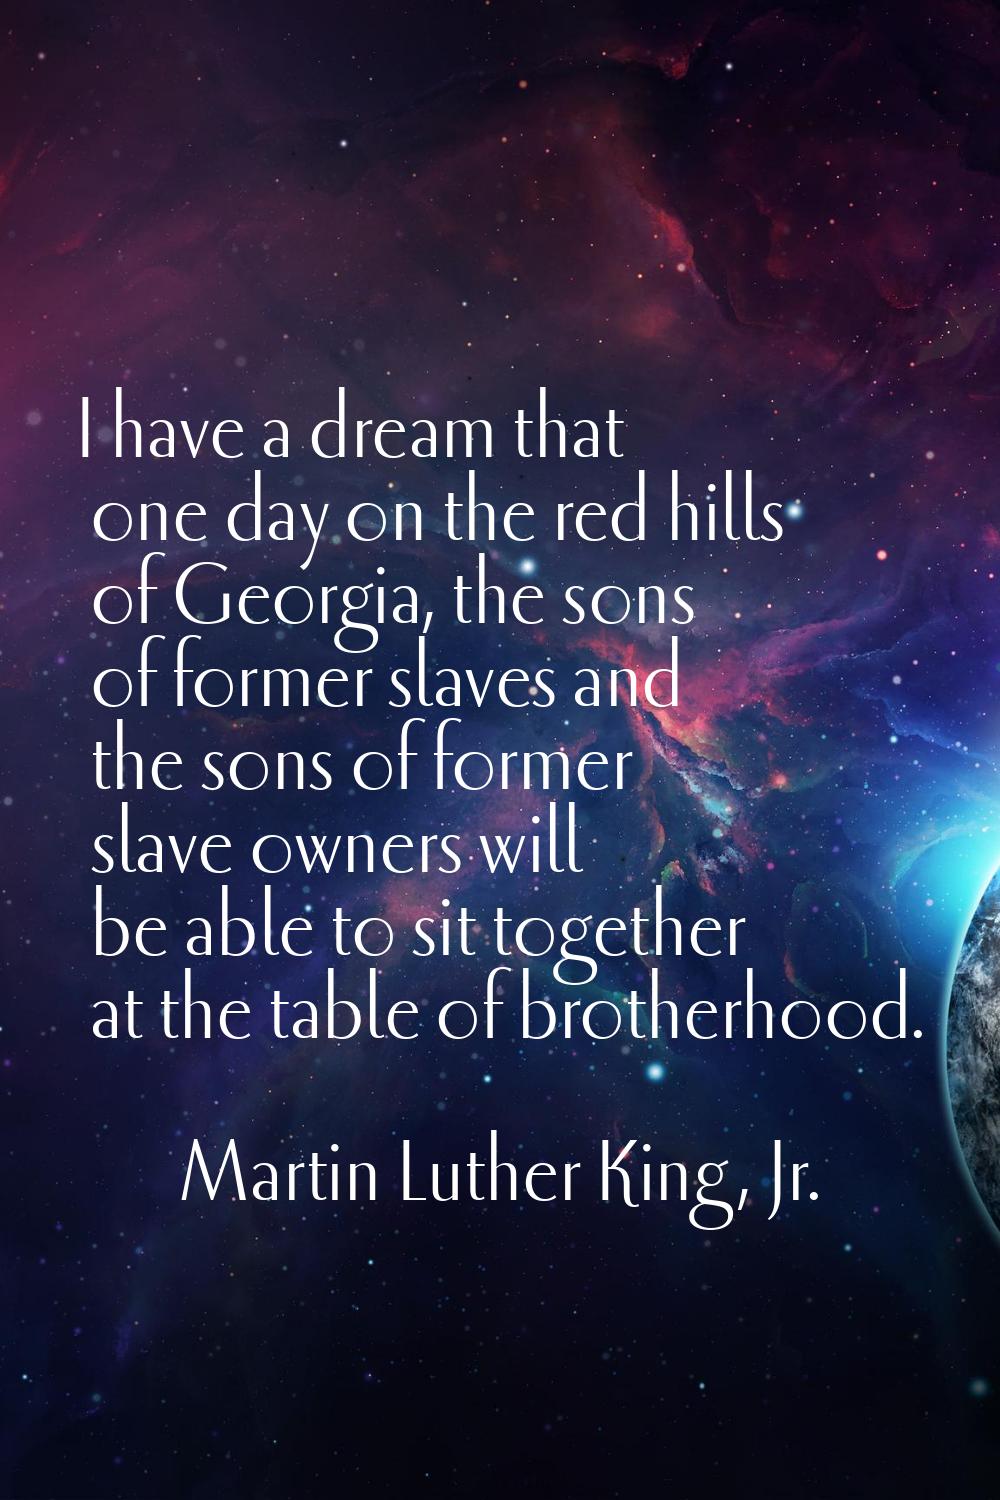 I have a dream that one day on the red hills of Georgia, the sons of former slaves and the sons of 